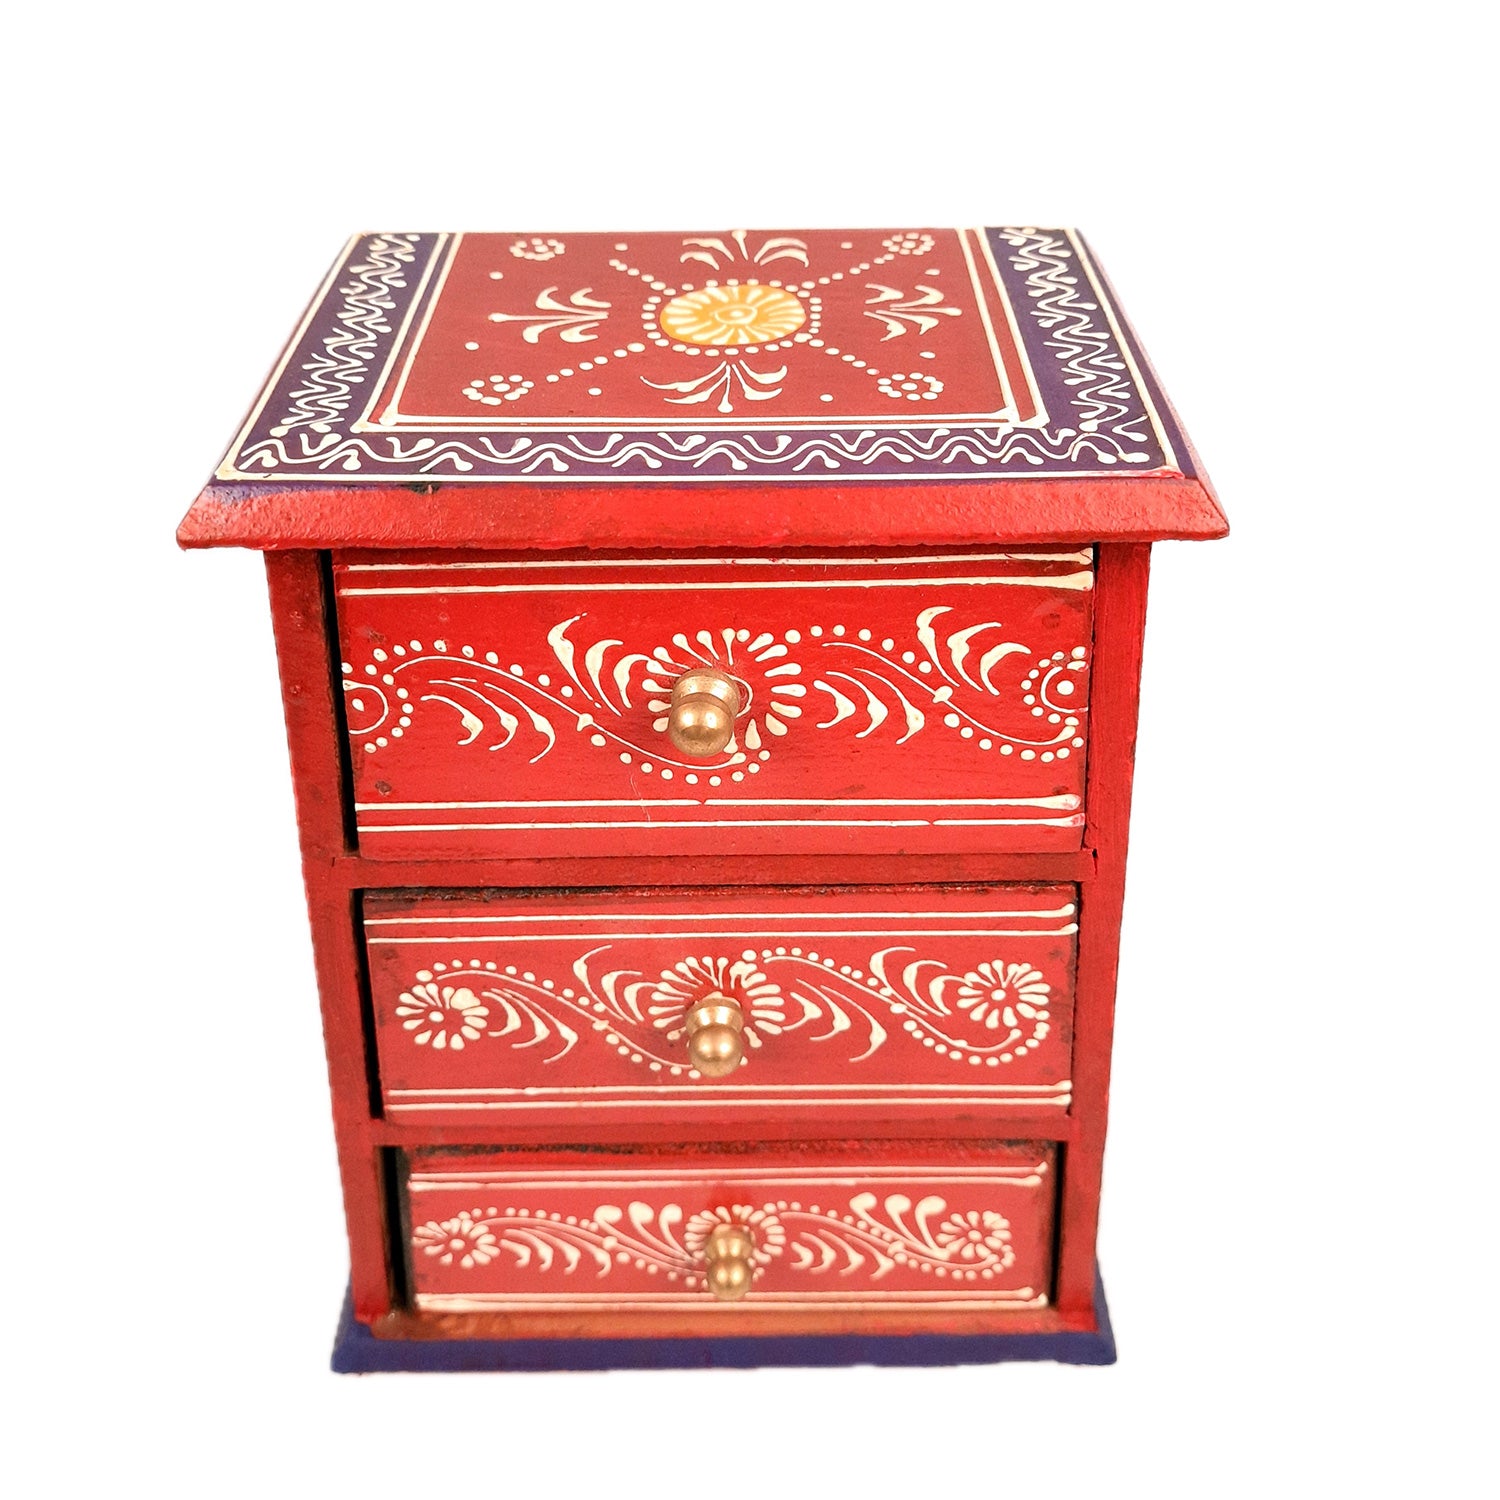 Jewellery Box | Decorative Wooden Jewelry Box - For Earring, Necklace & Gifts - 8 Inch - Apkamart